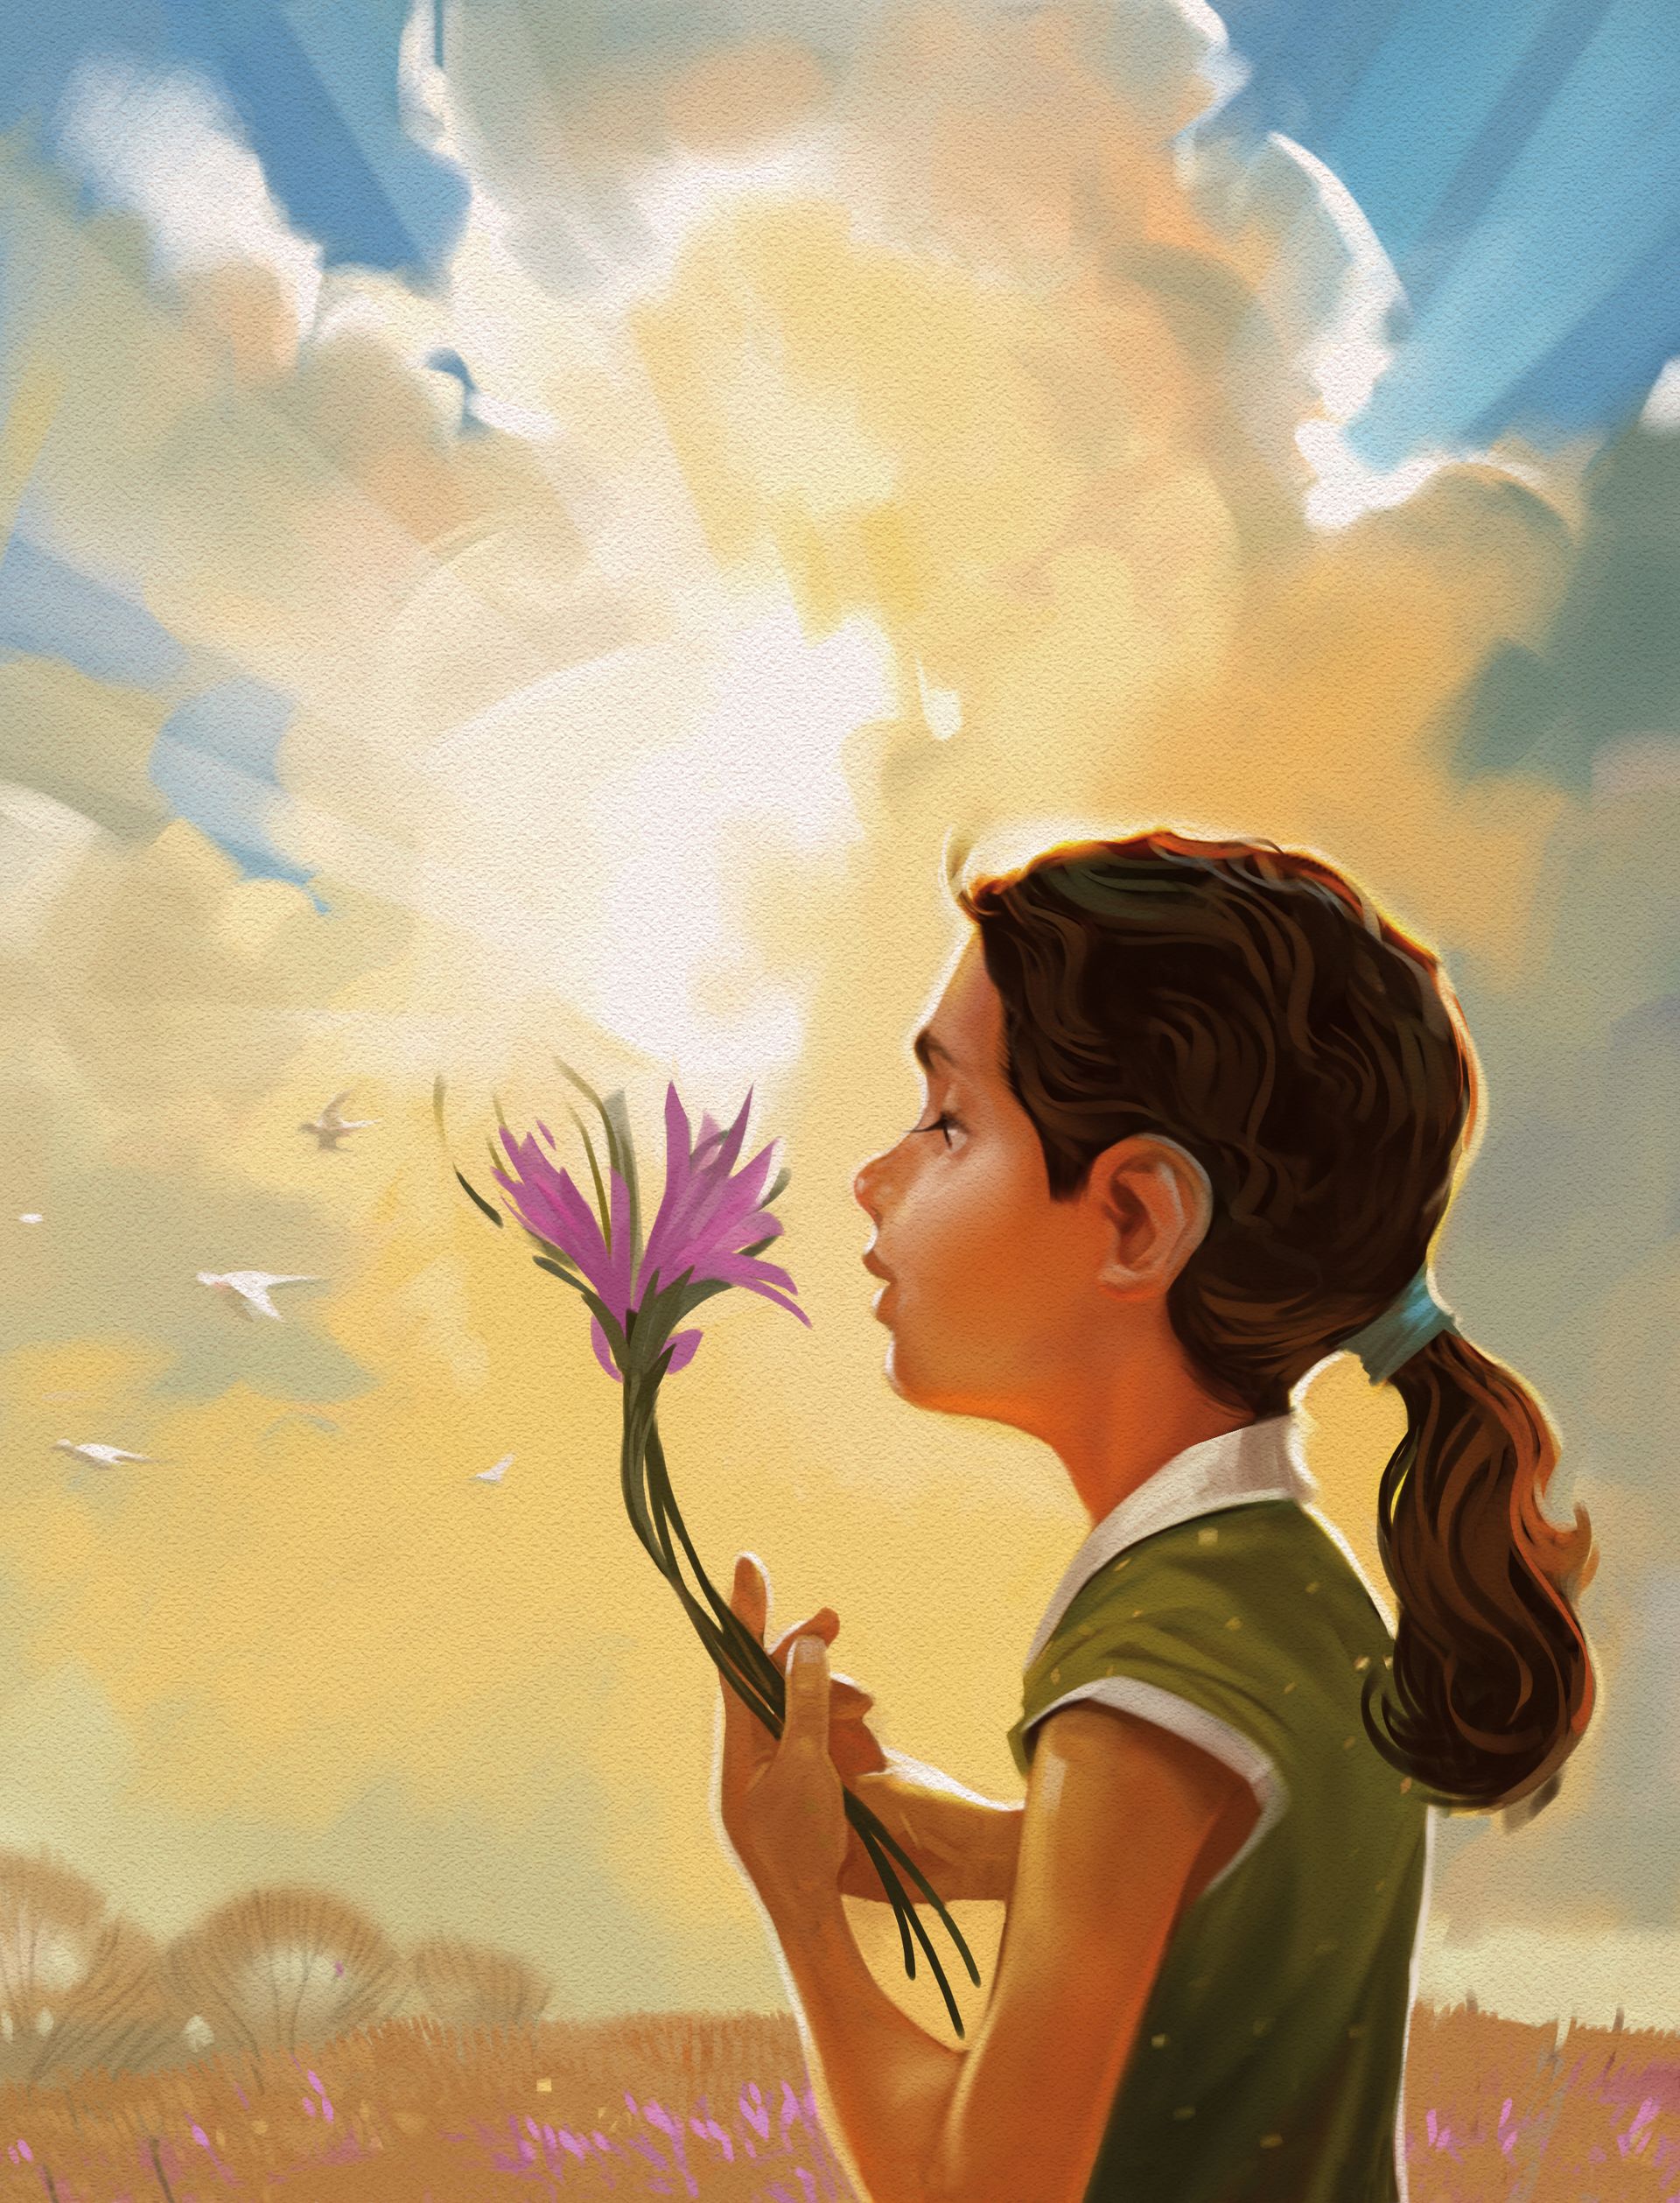 A girl picks purple wildflowers from a field and holds them up to look at them.